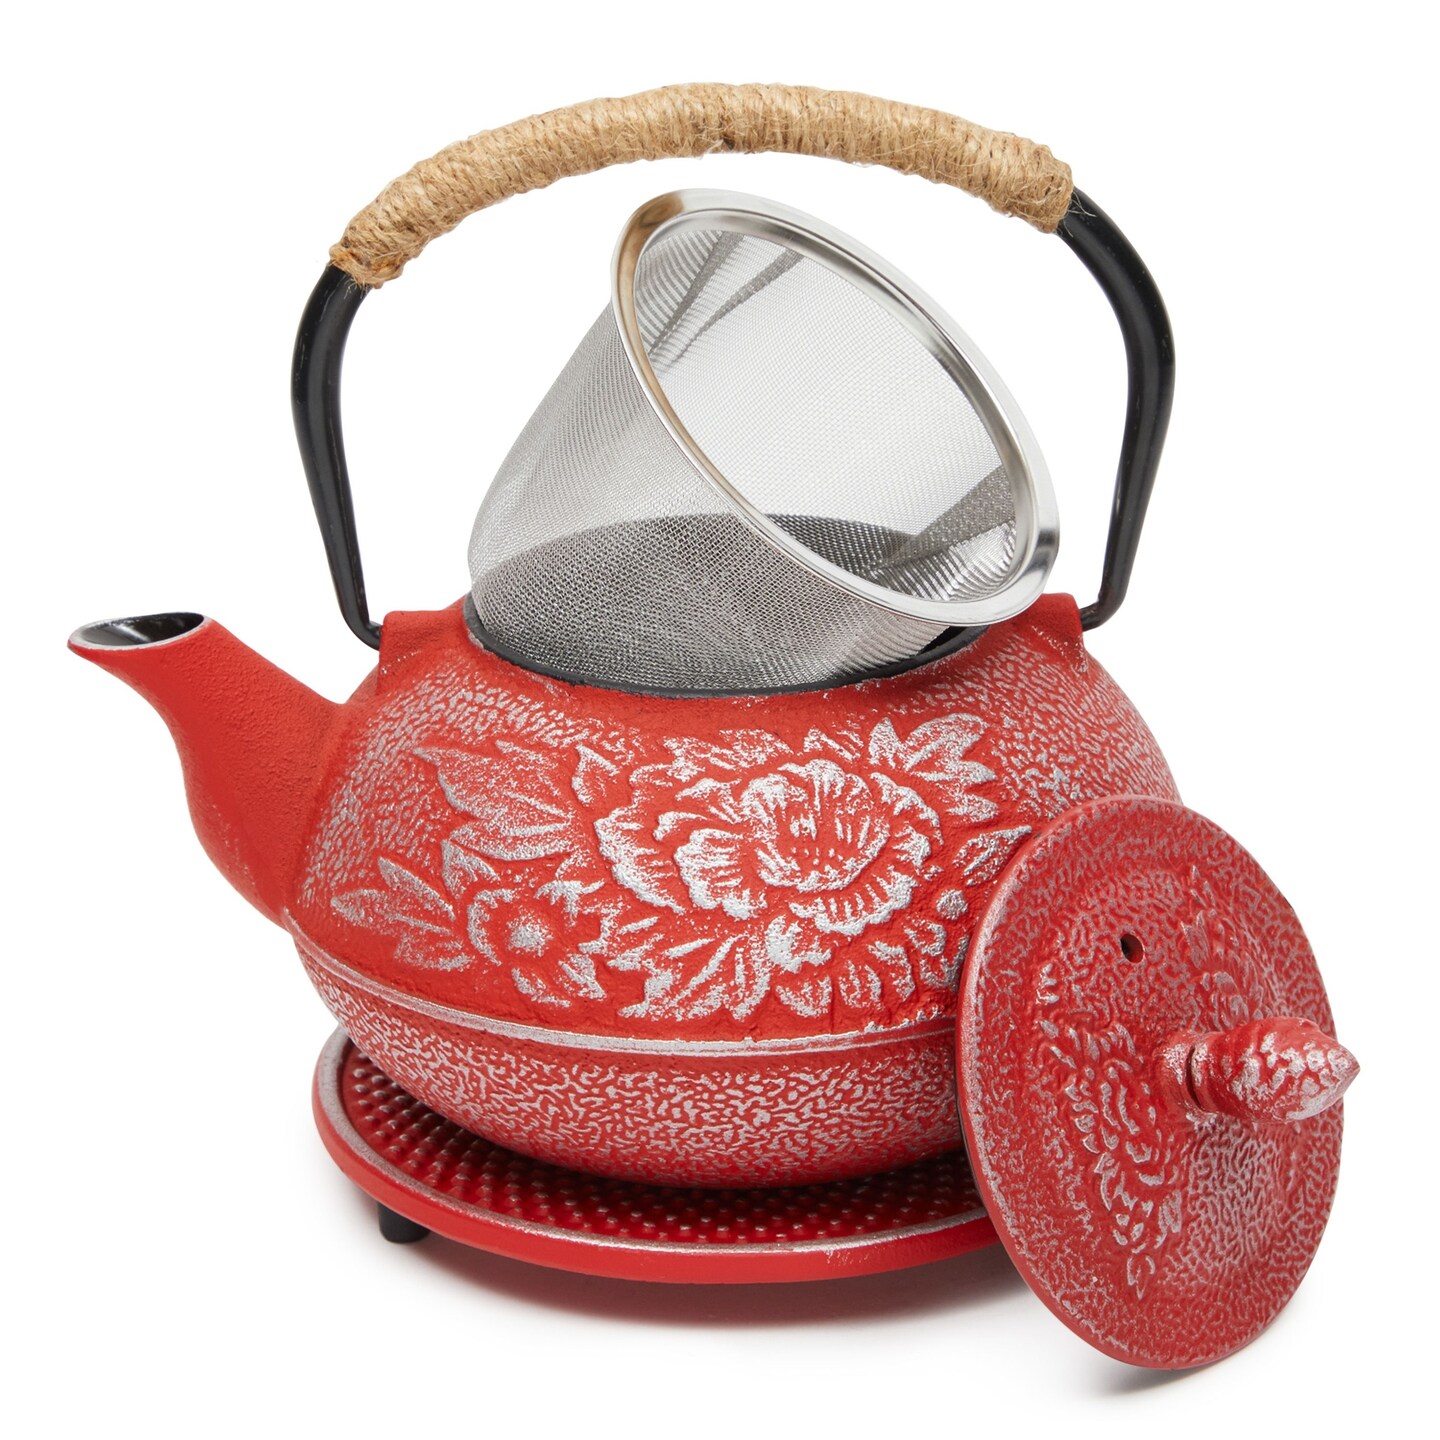 Cast Iron Teapot Set With Infuser, Japanese Tea Set and Cups